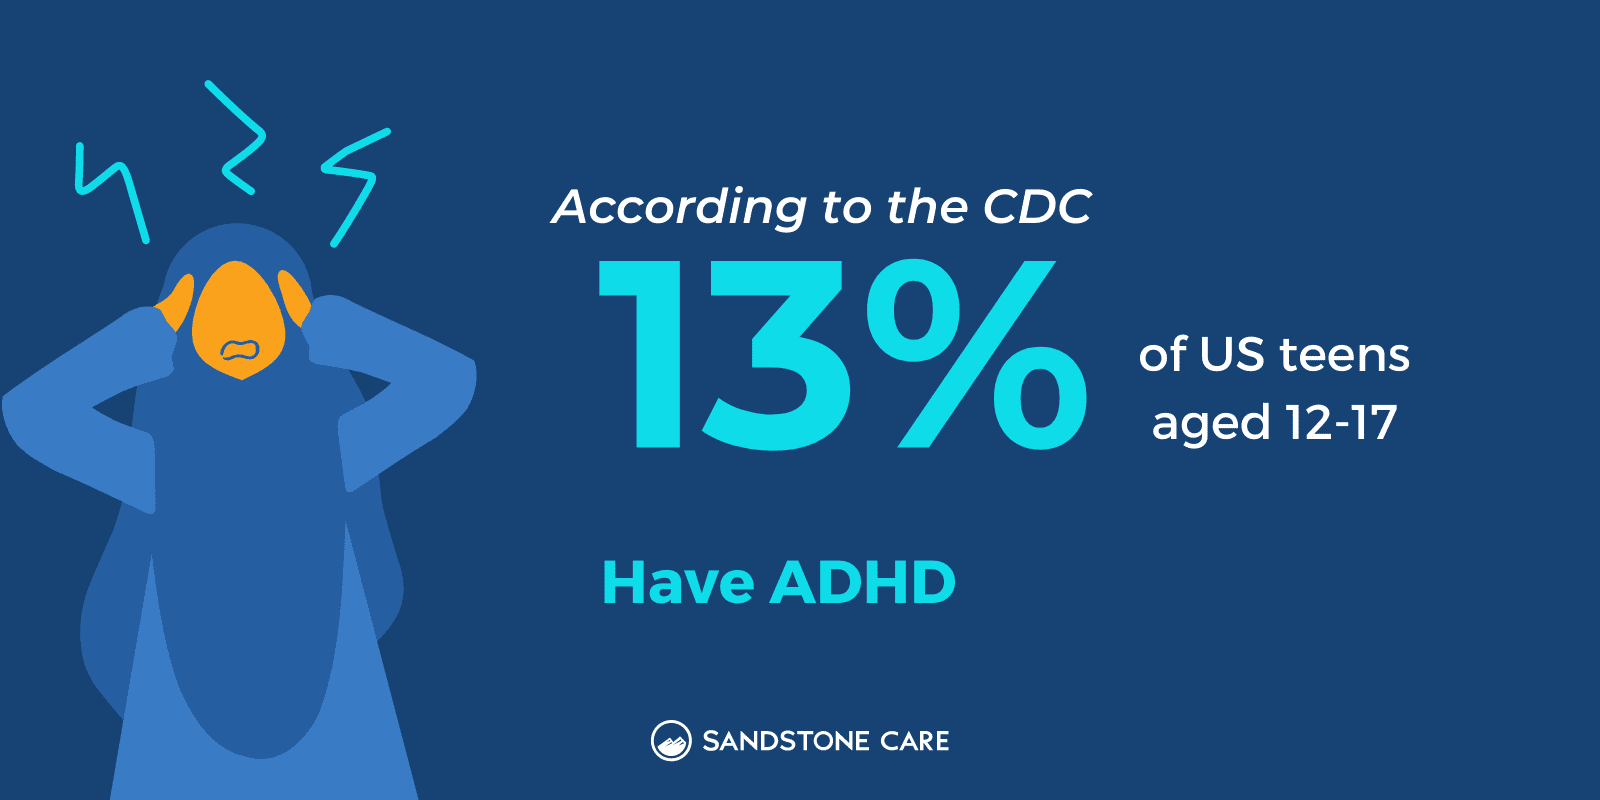 According to CDC 13% of US teens aged 12-17 have ADHD